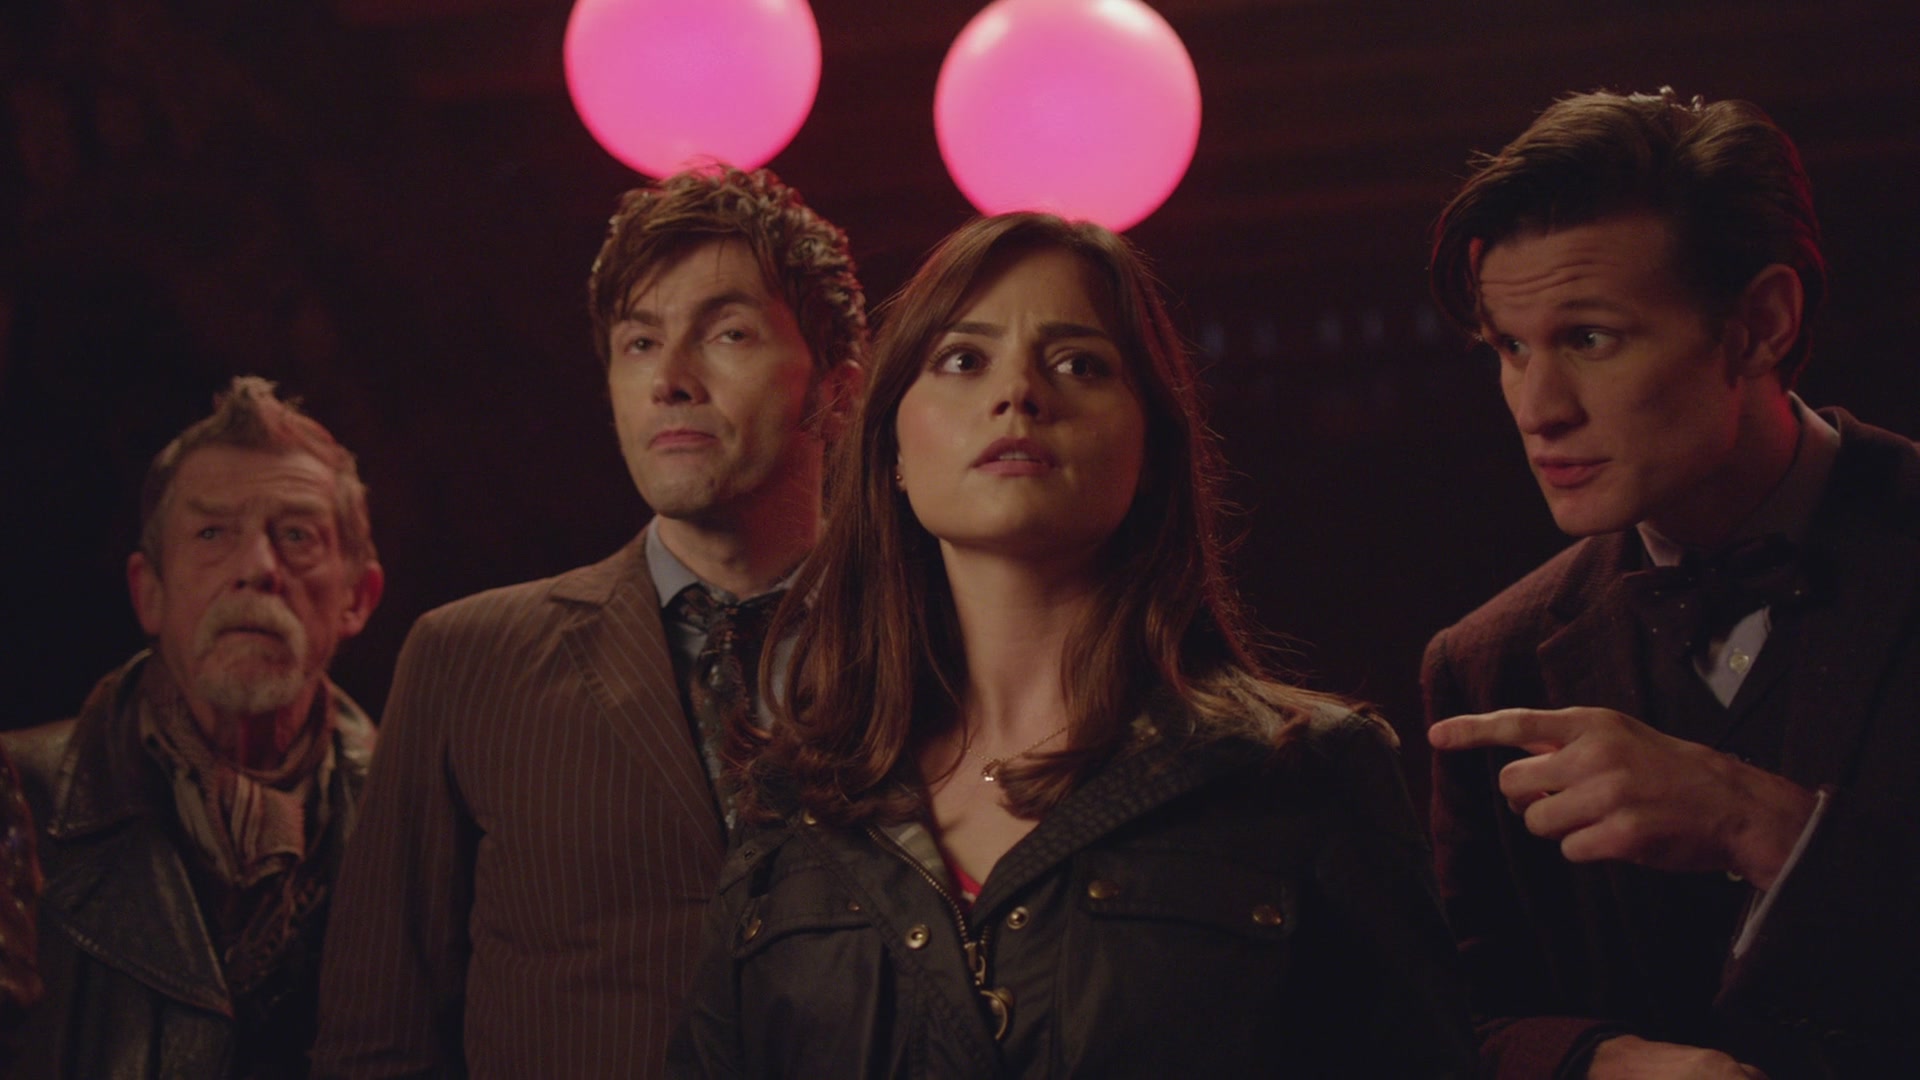 DayOfTheDoctor-Caps-0805.jpg